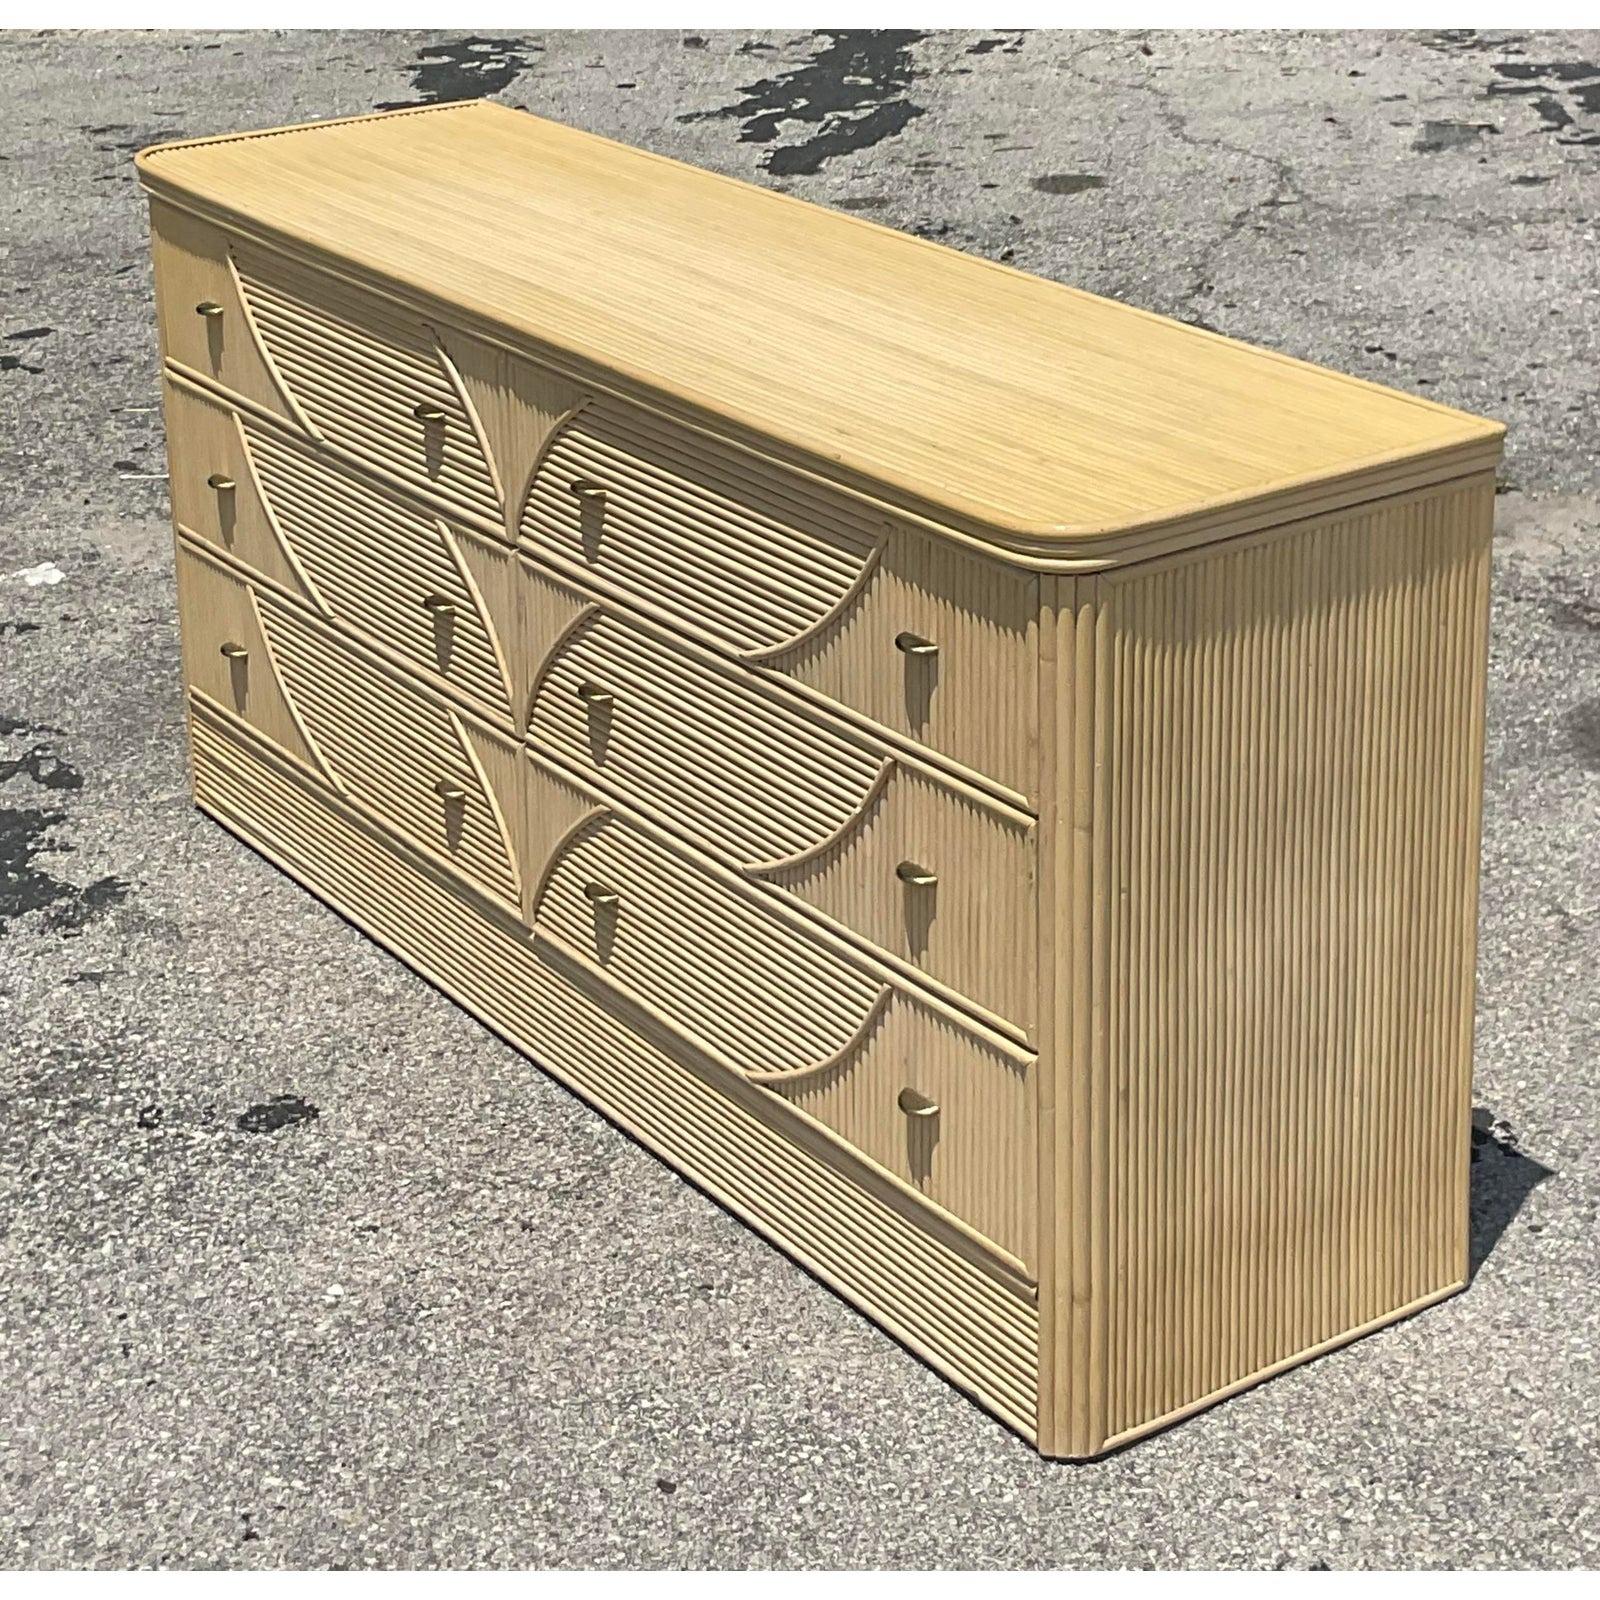 A fabulous vintage Coastal six drawer dresser. Beautiful cerused pencil reed construction with a chic leaves pattern. Acquired from a Palm Beach estate.